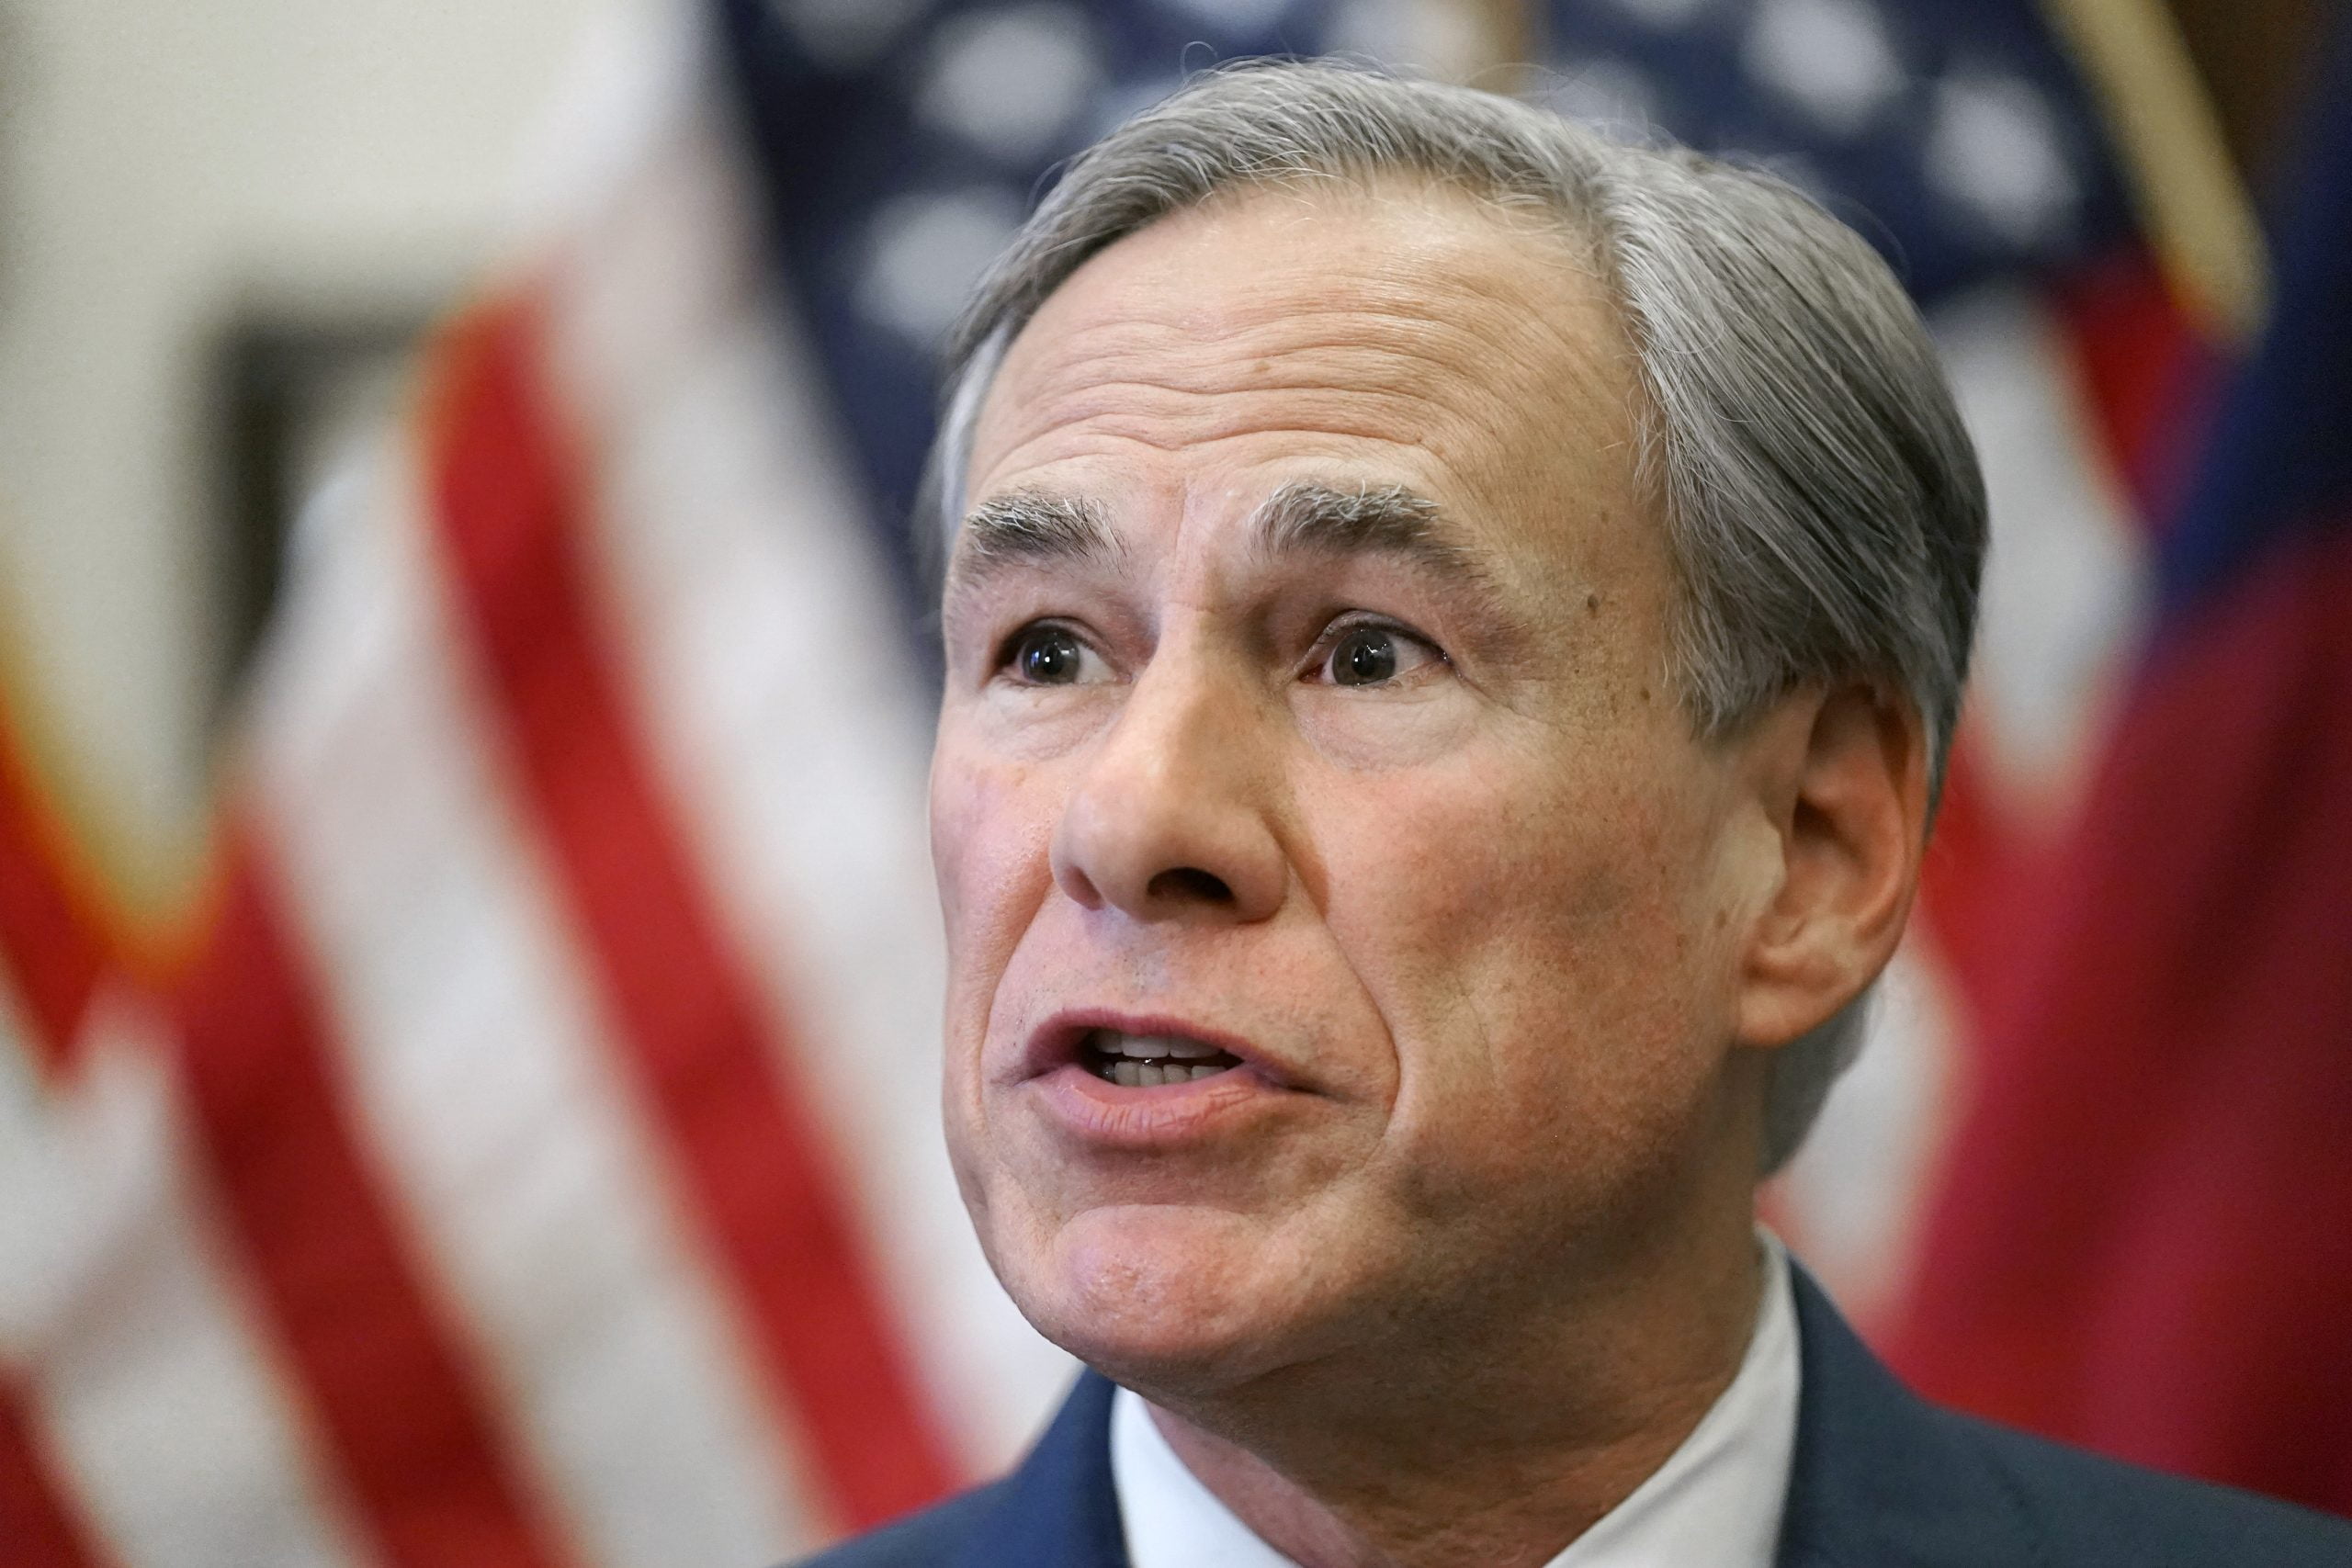 Gov. Abbott suing Biden administration over National Guard vaccine requirements 6